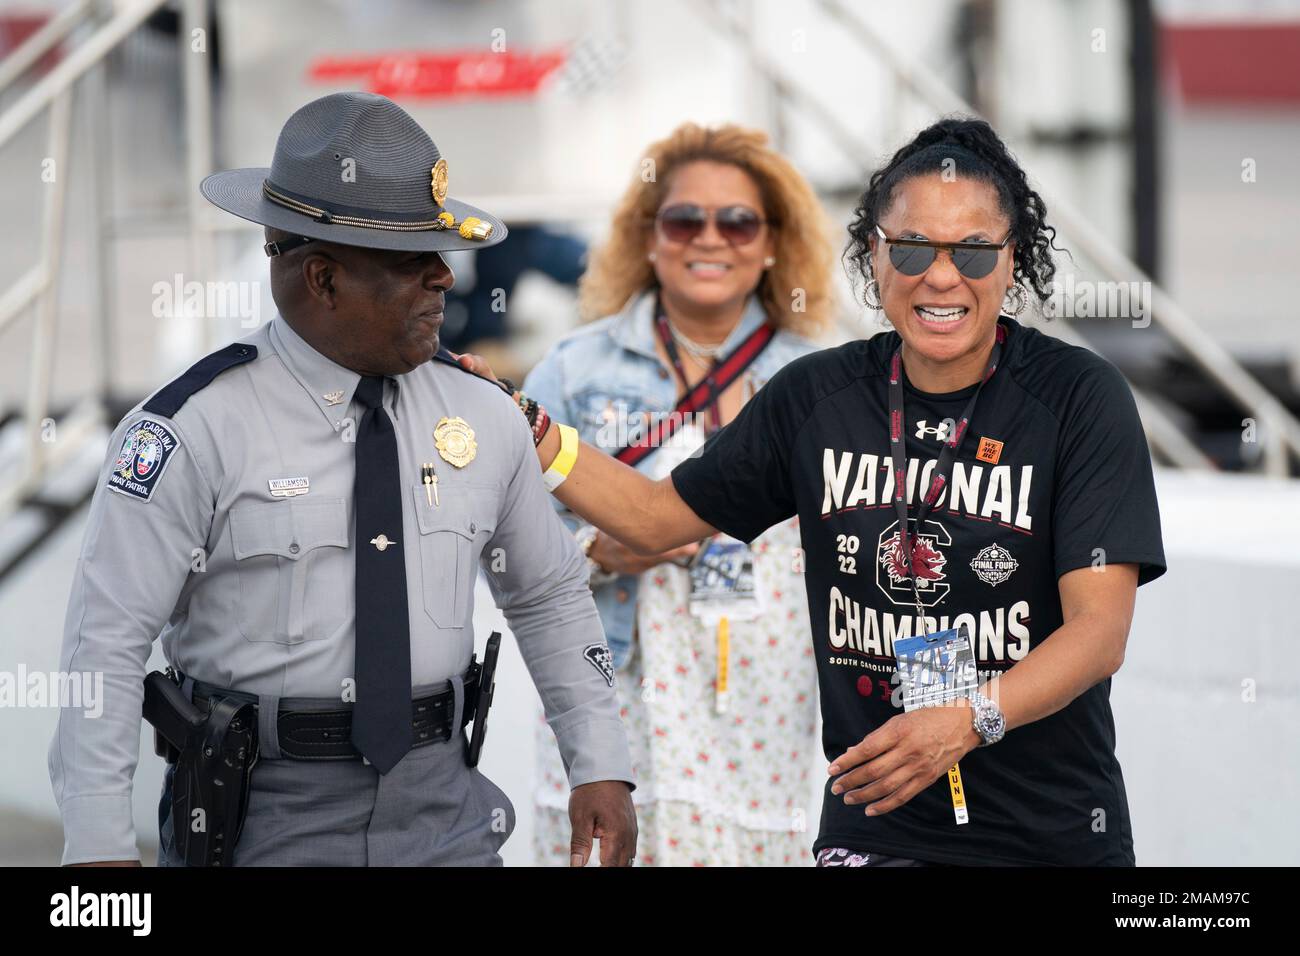 University of South Carolina women's basketball coach Dawn Staley, right,  shares a laugh with Col. Christopher Williamson, commander of the South  Carolina Highway Patrol, before the NASCAR Southern 500 auto race Sunday,